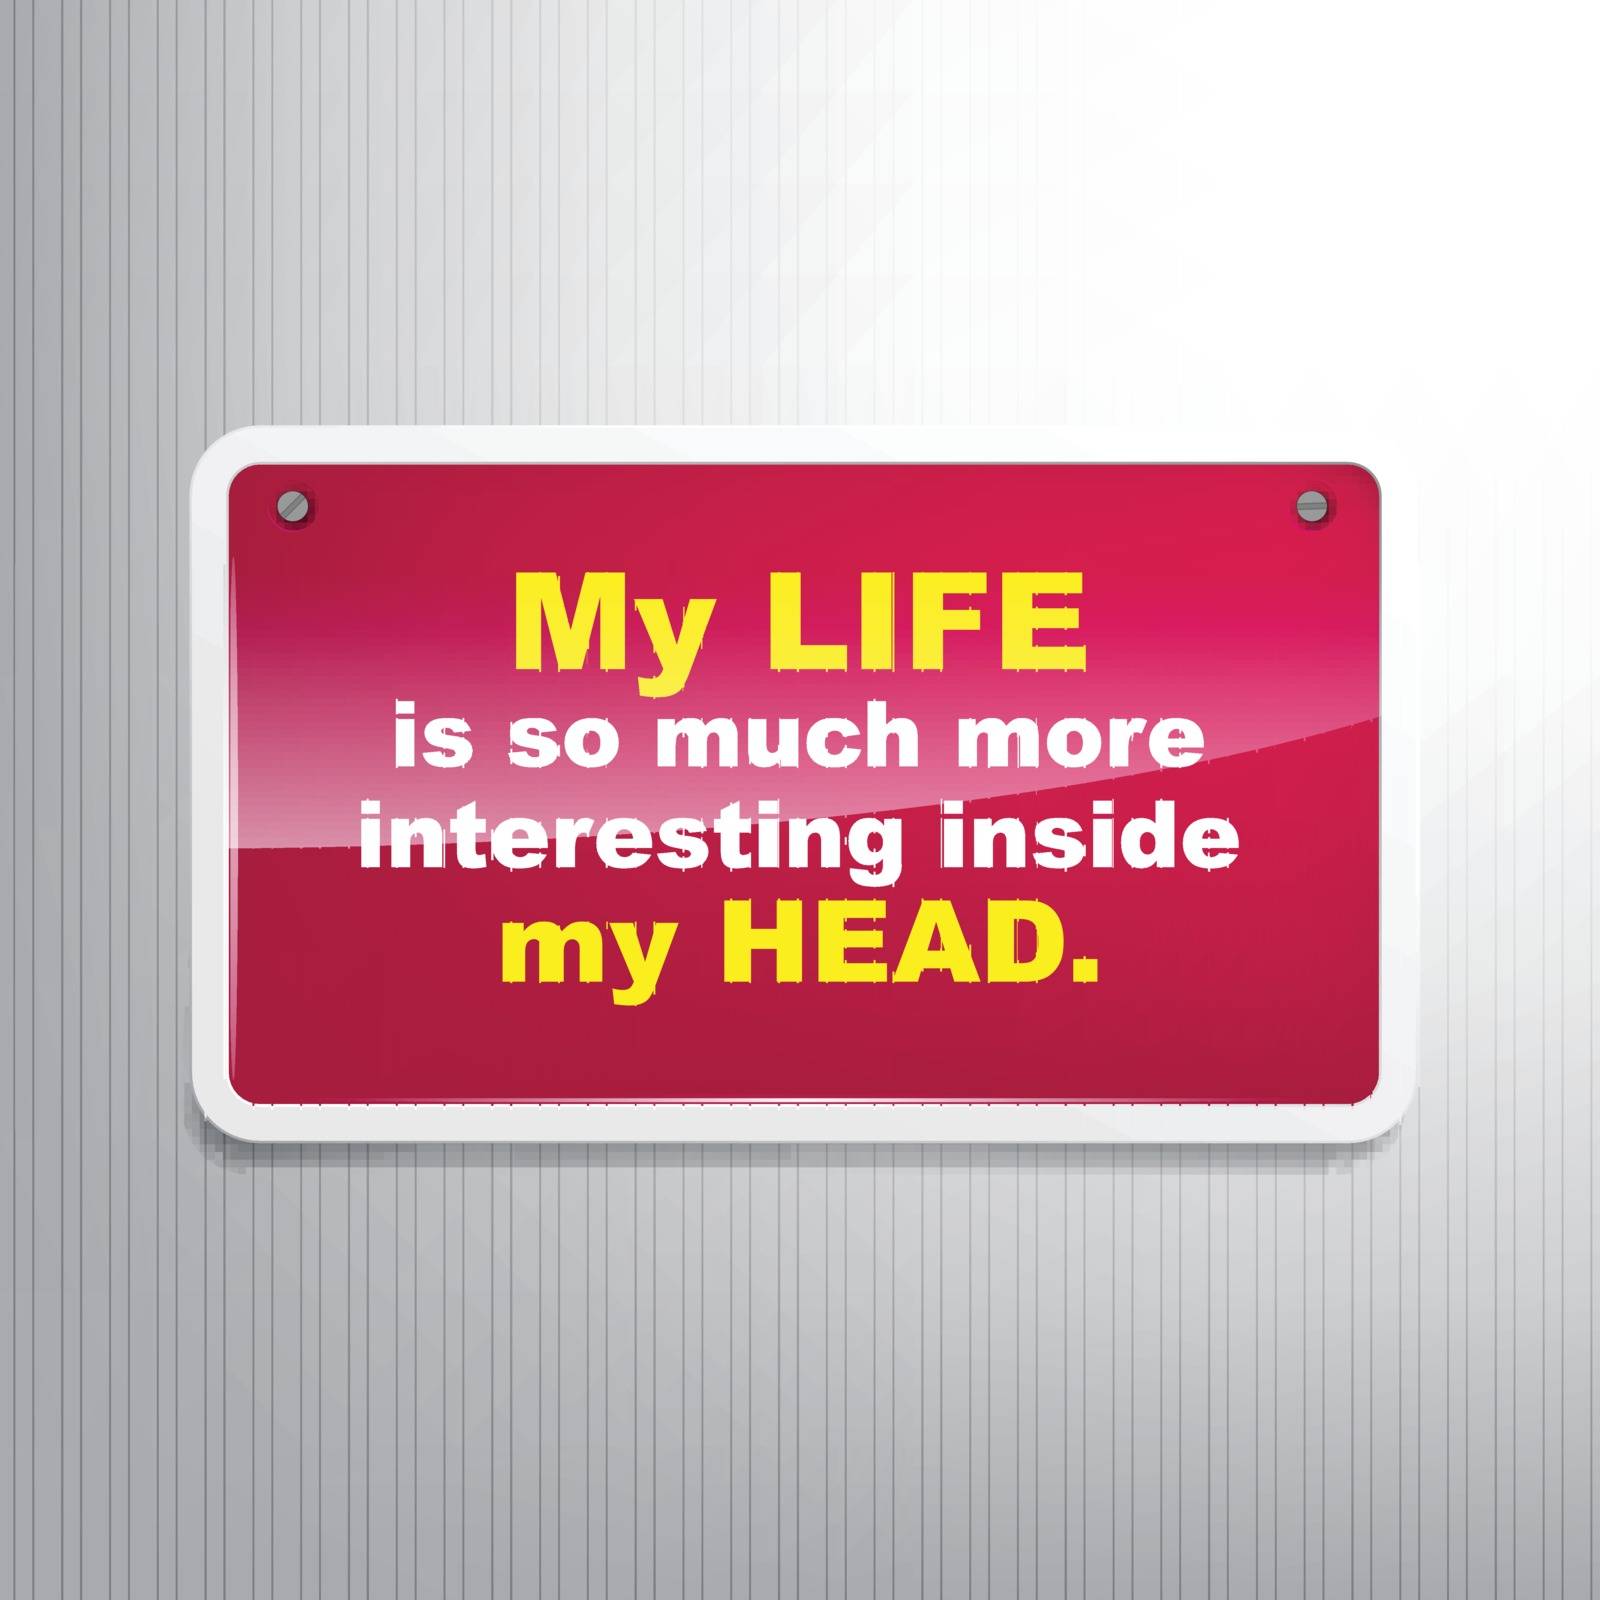 My life is so much more interesting inside my head. Motivational background.